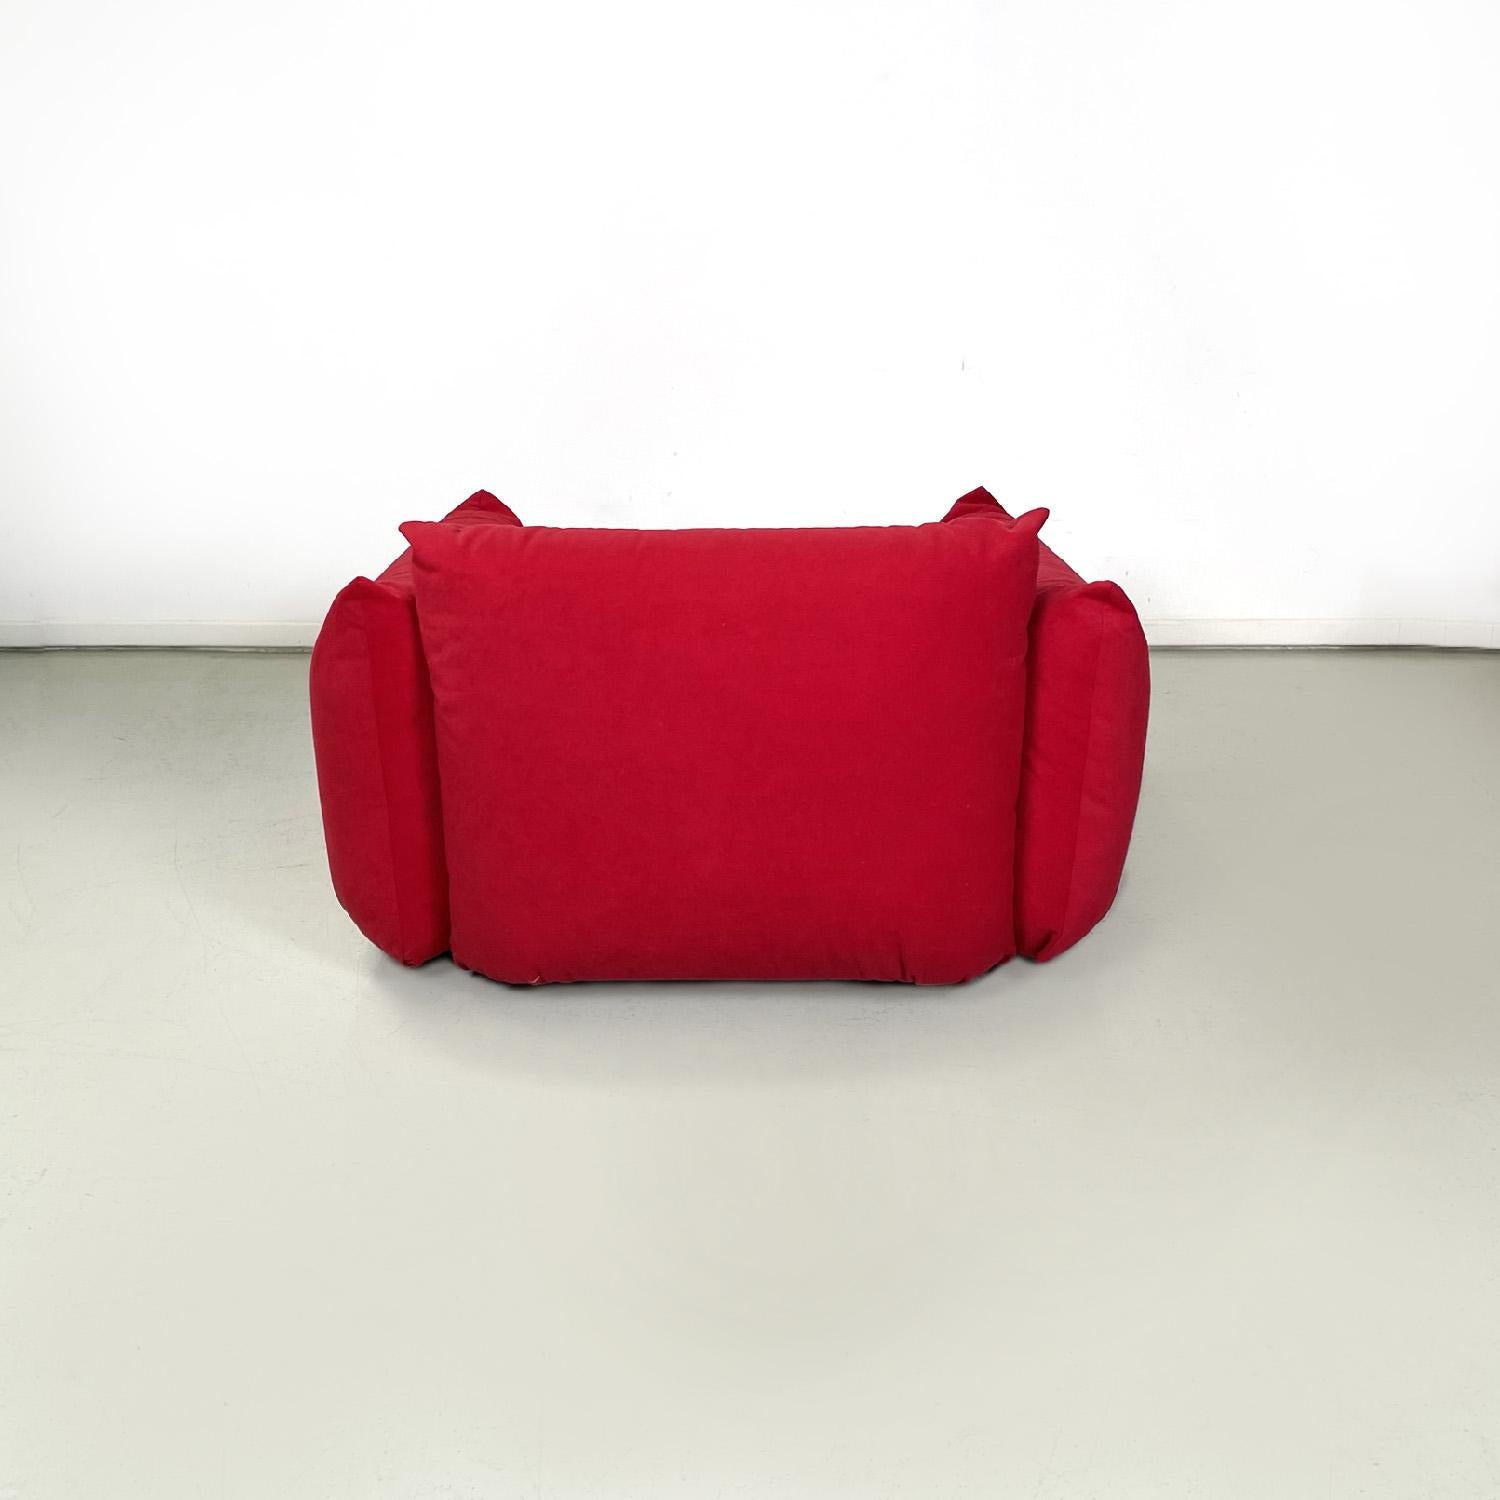 Italian modern red armchair Marenco by Mario Marenco for Arflex, 1970s In Good Condition For Sale In MIlano, IT